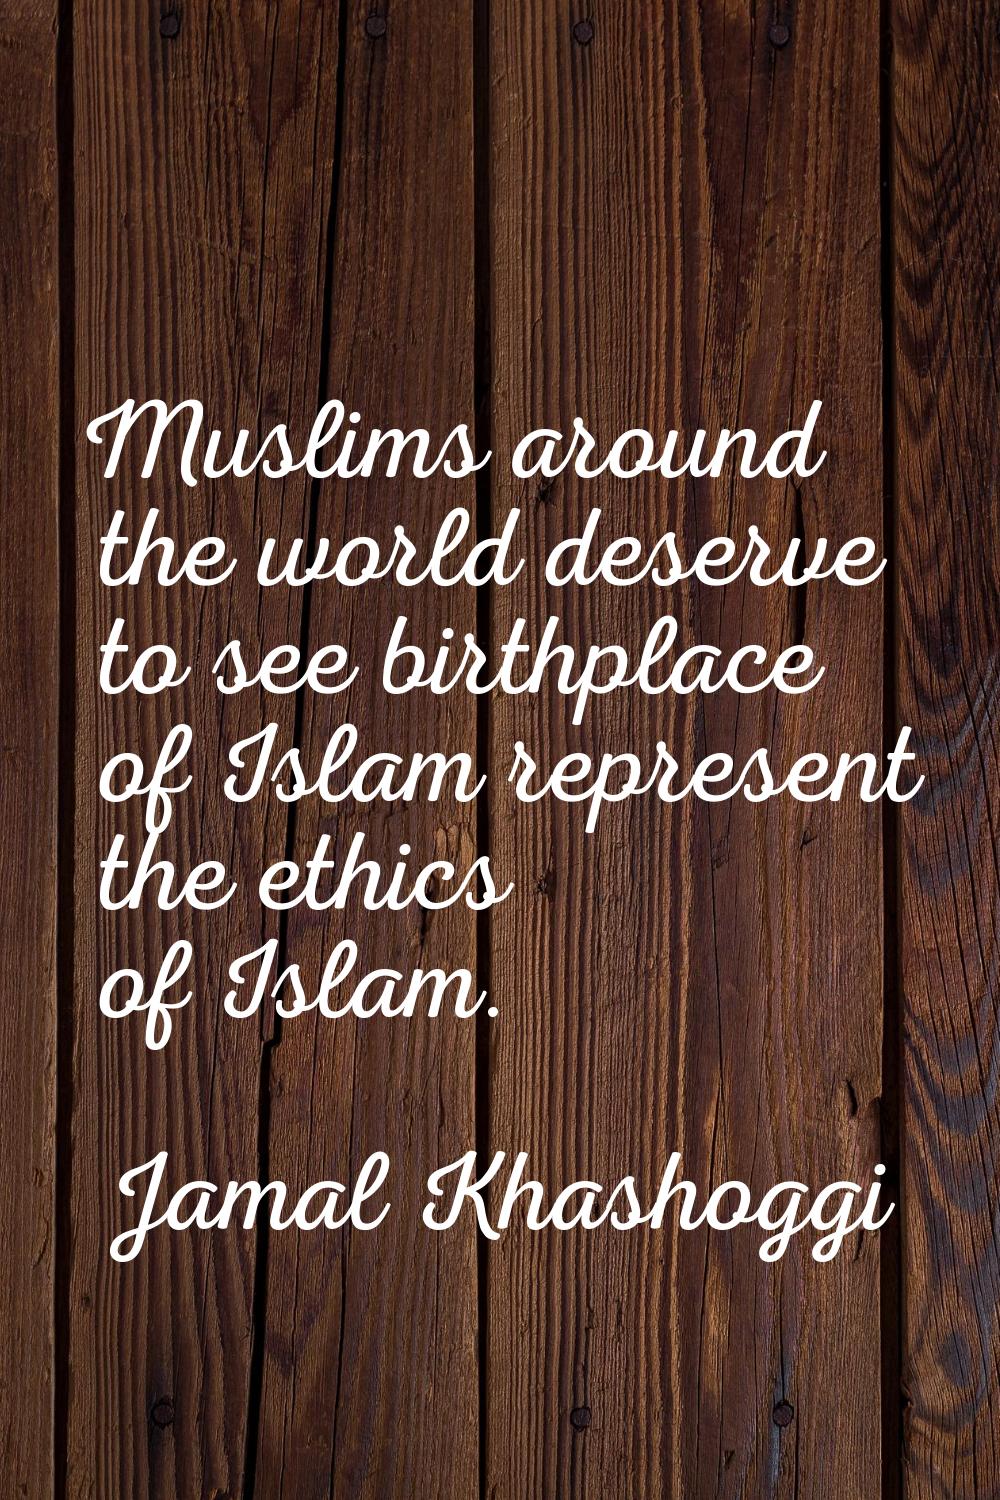 Muslims around the world deserve to see birthplace of Islam represent the ethics of Islam.